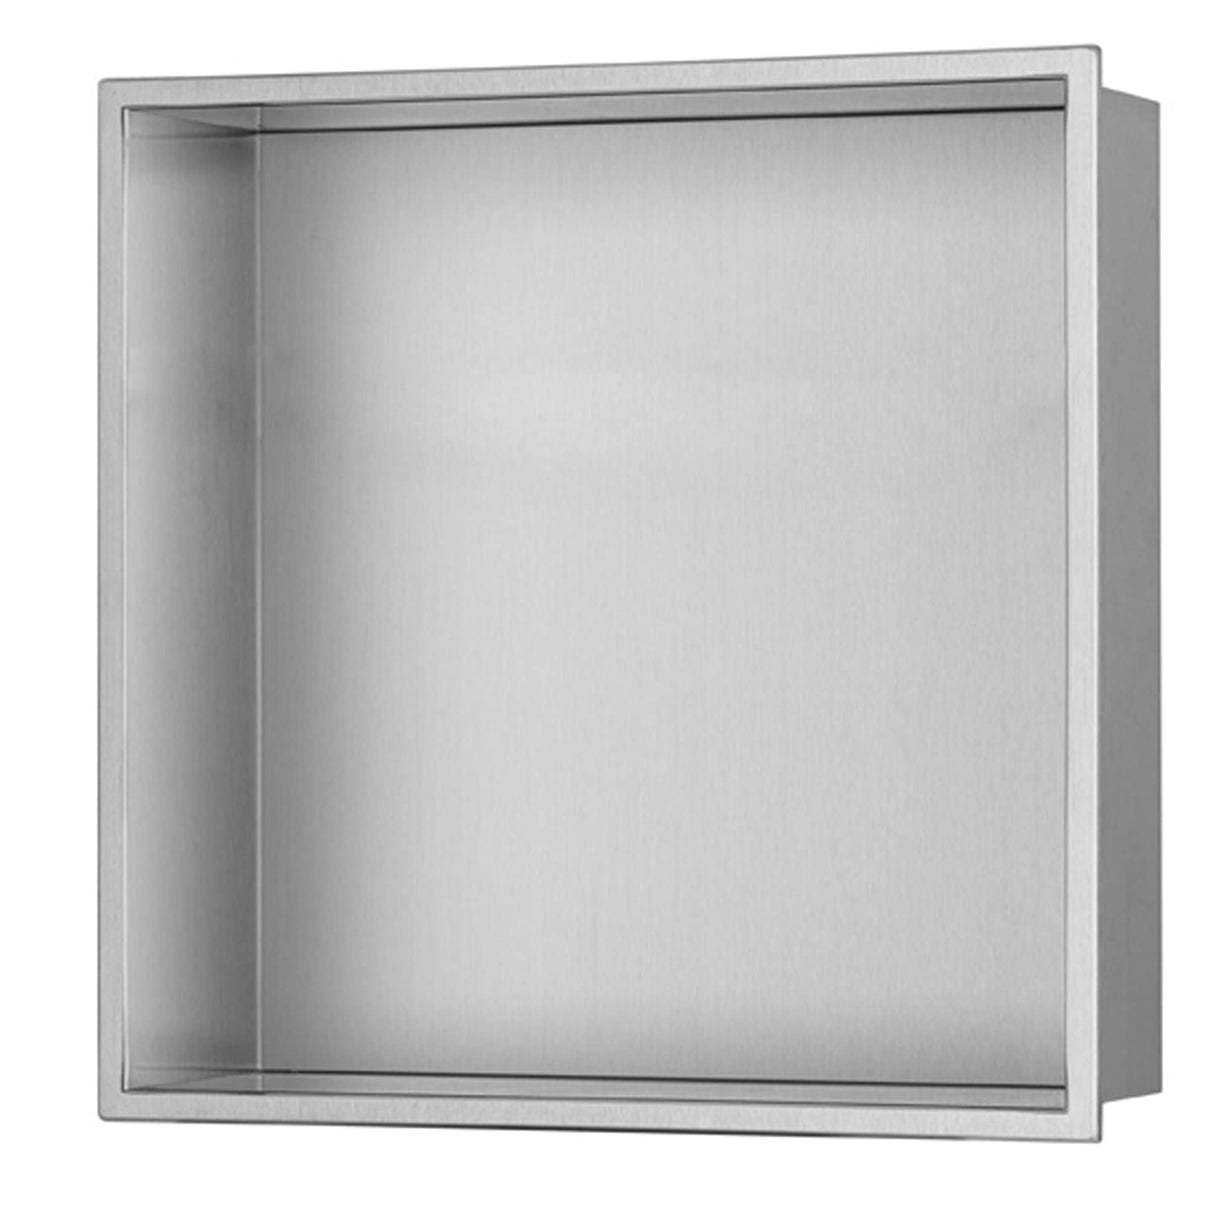 PULSE ShowerSpas NI-1212-SSB Niche in Brushed Stainless Steel